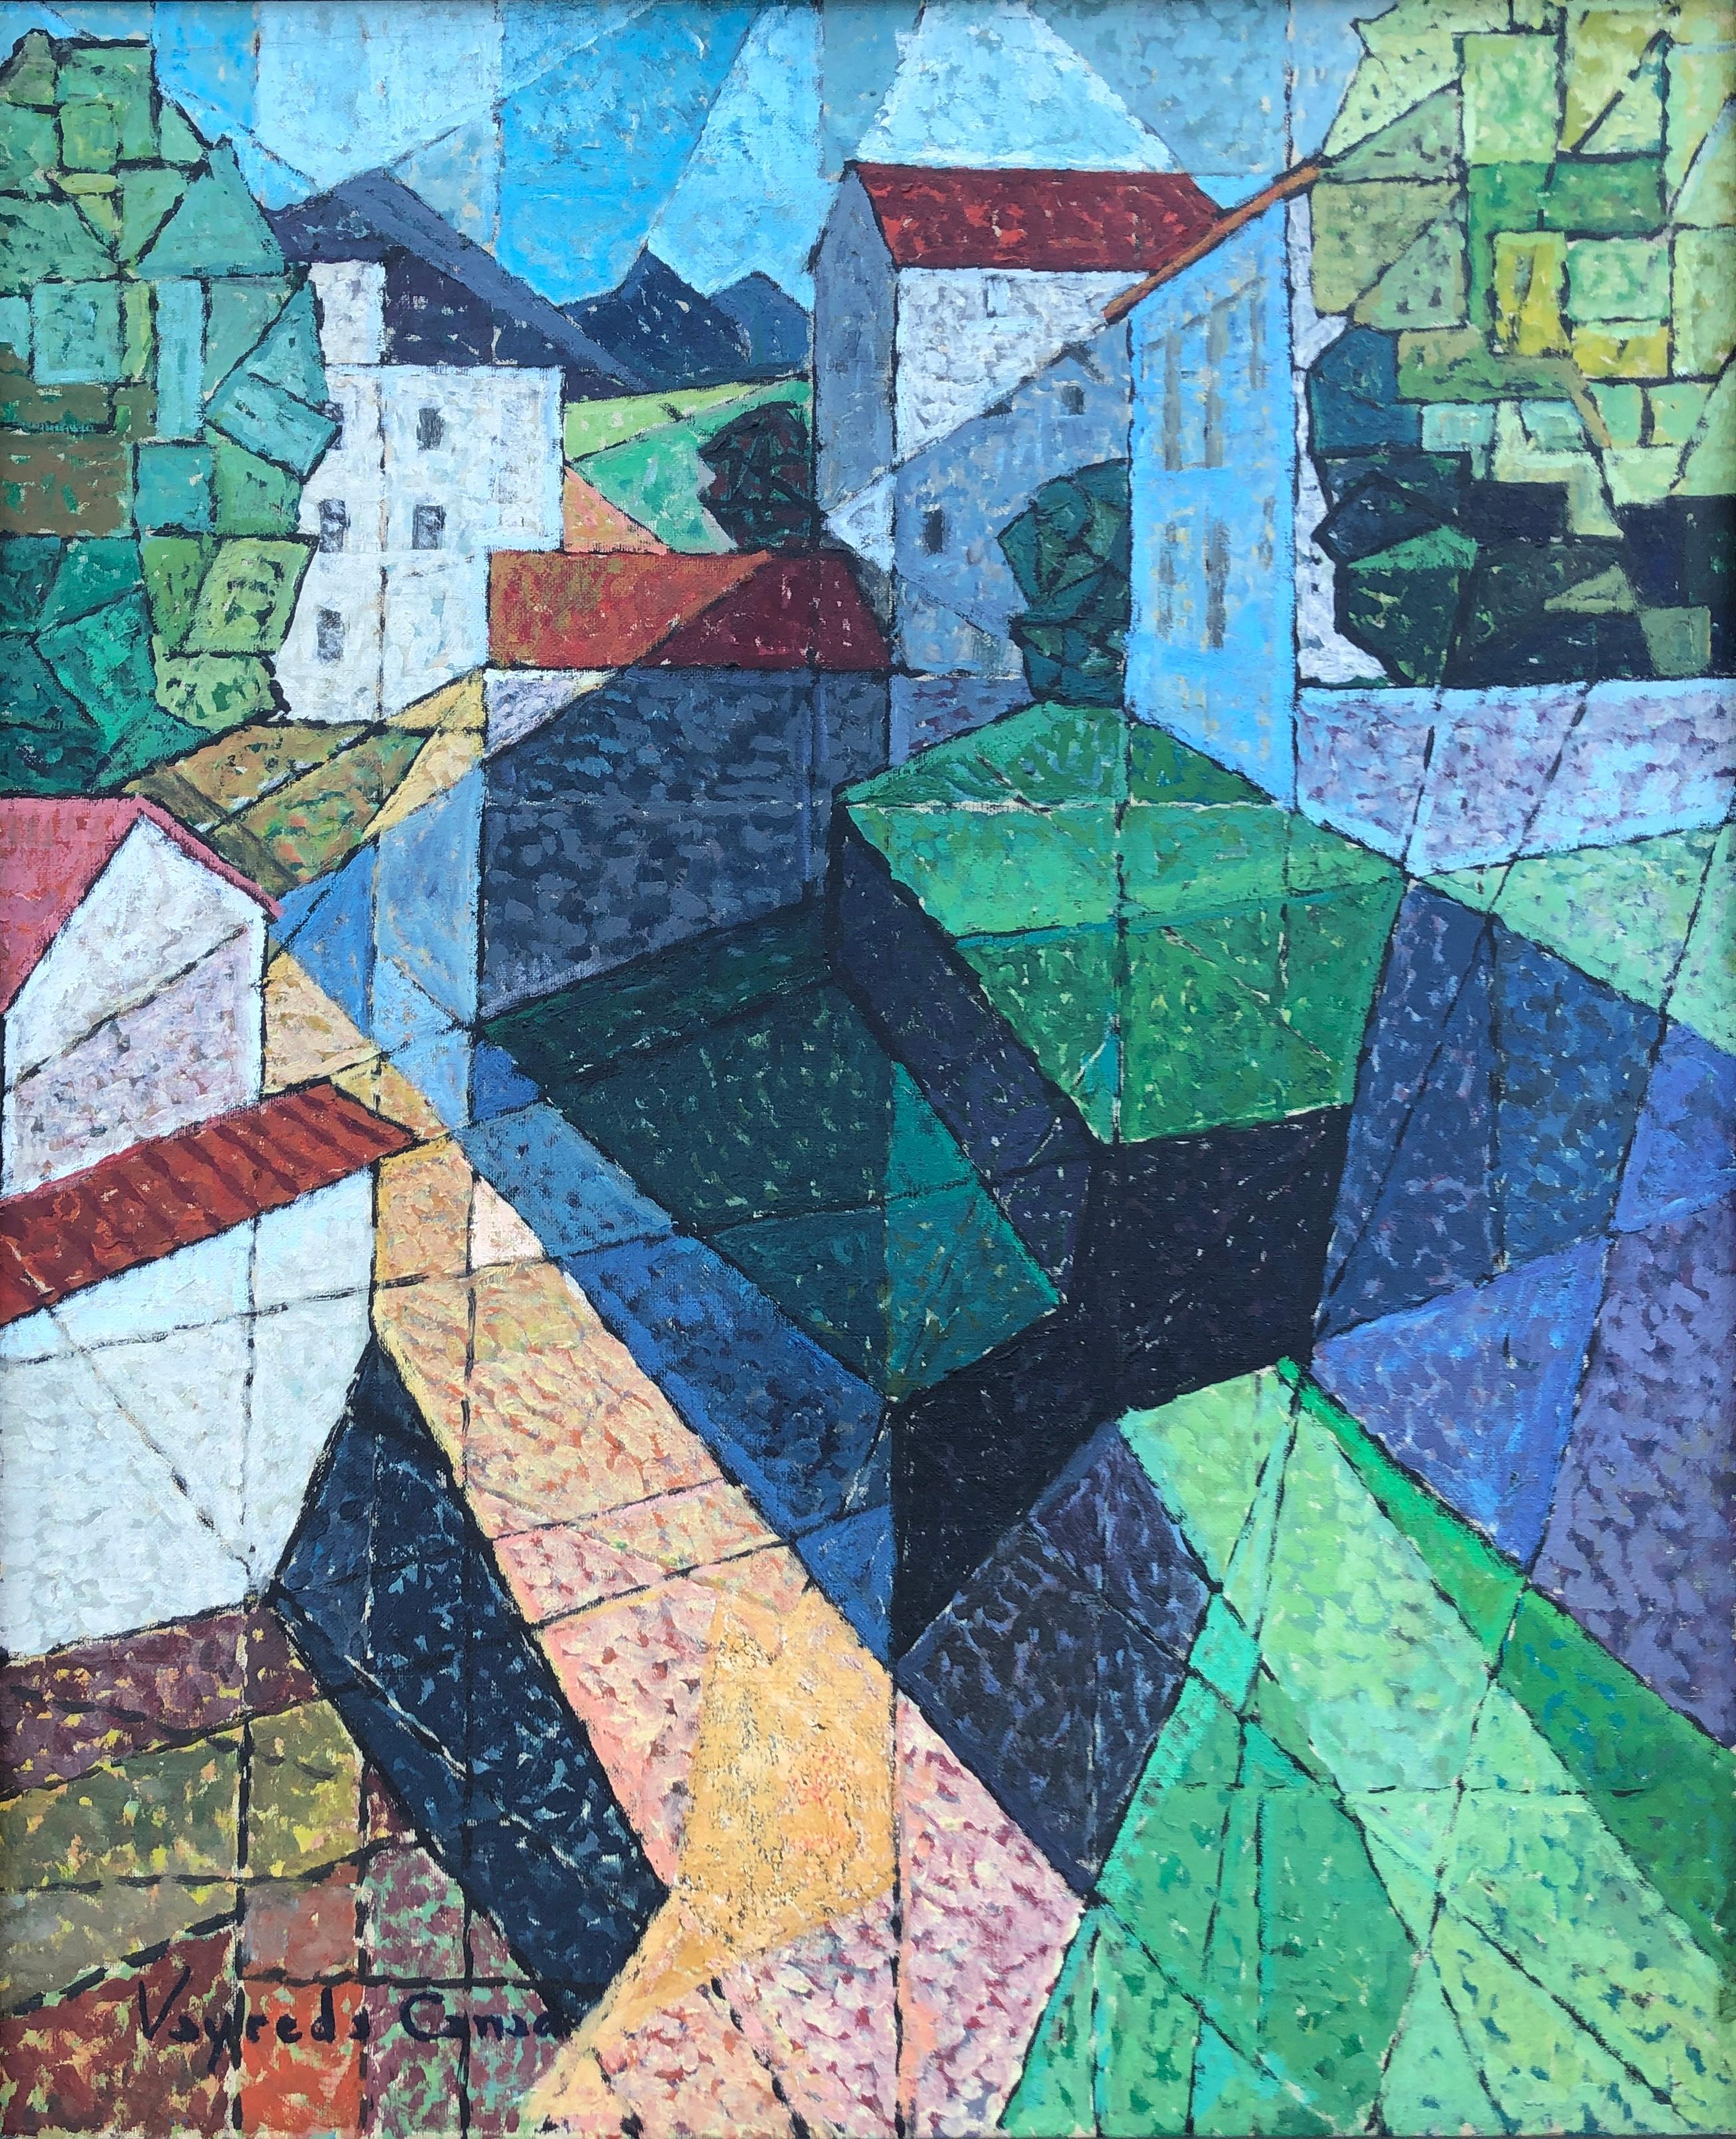 Spanish town cubist oil on canvas painting spain